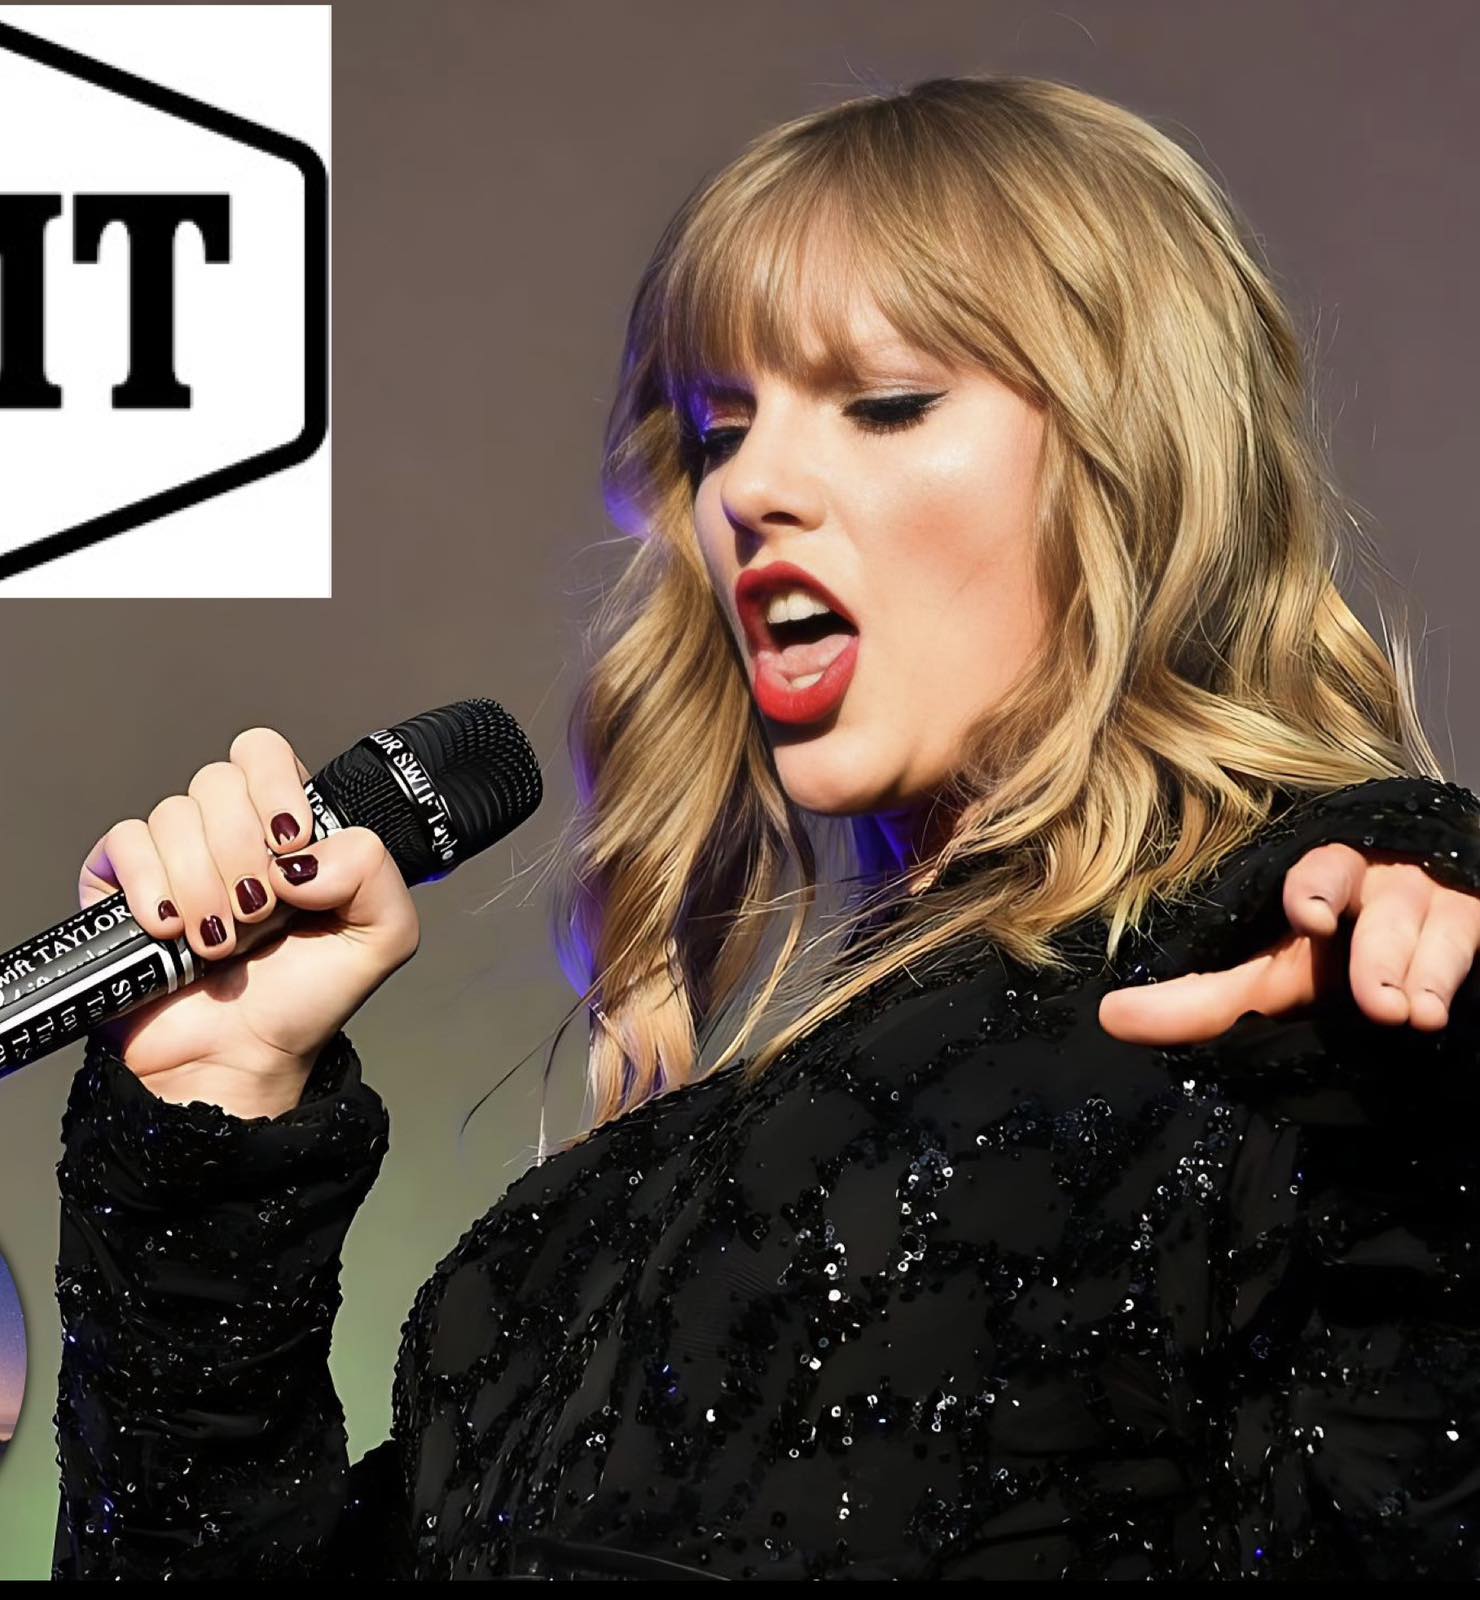 CMT Imposes Lifetime Ban on Taylor Swift, Declares “She’s More Troublesome Than Garth Brooks”